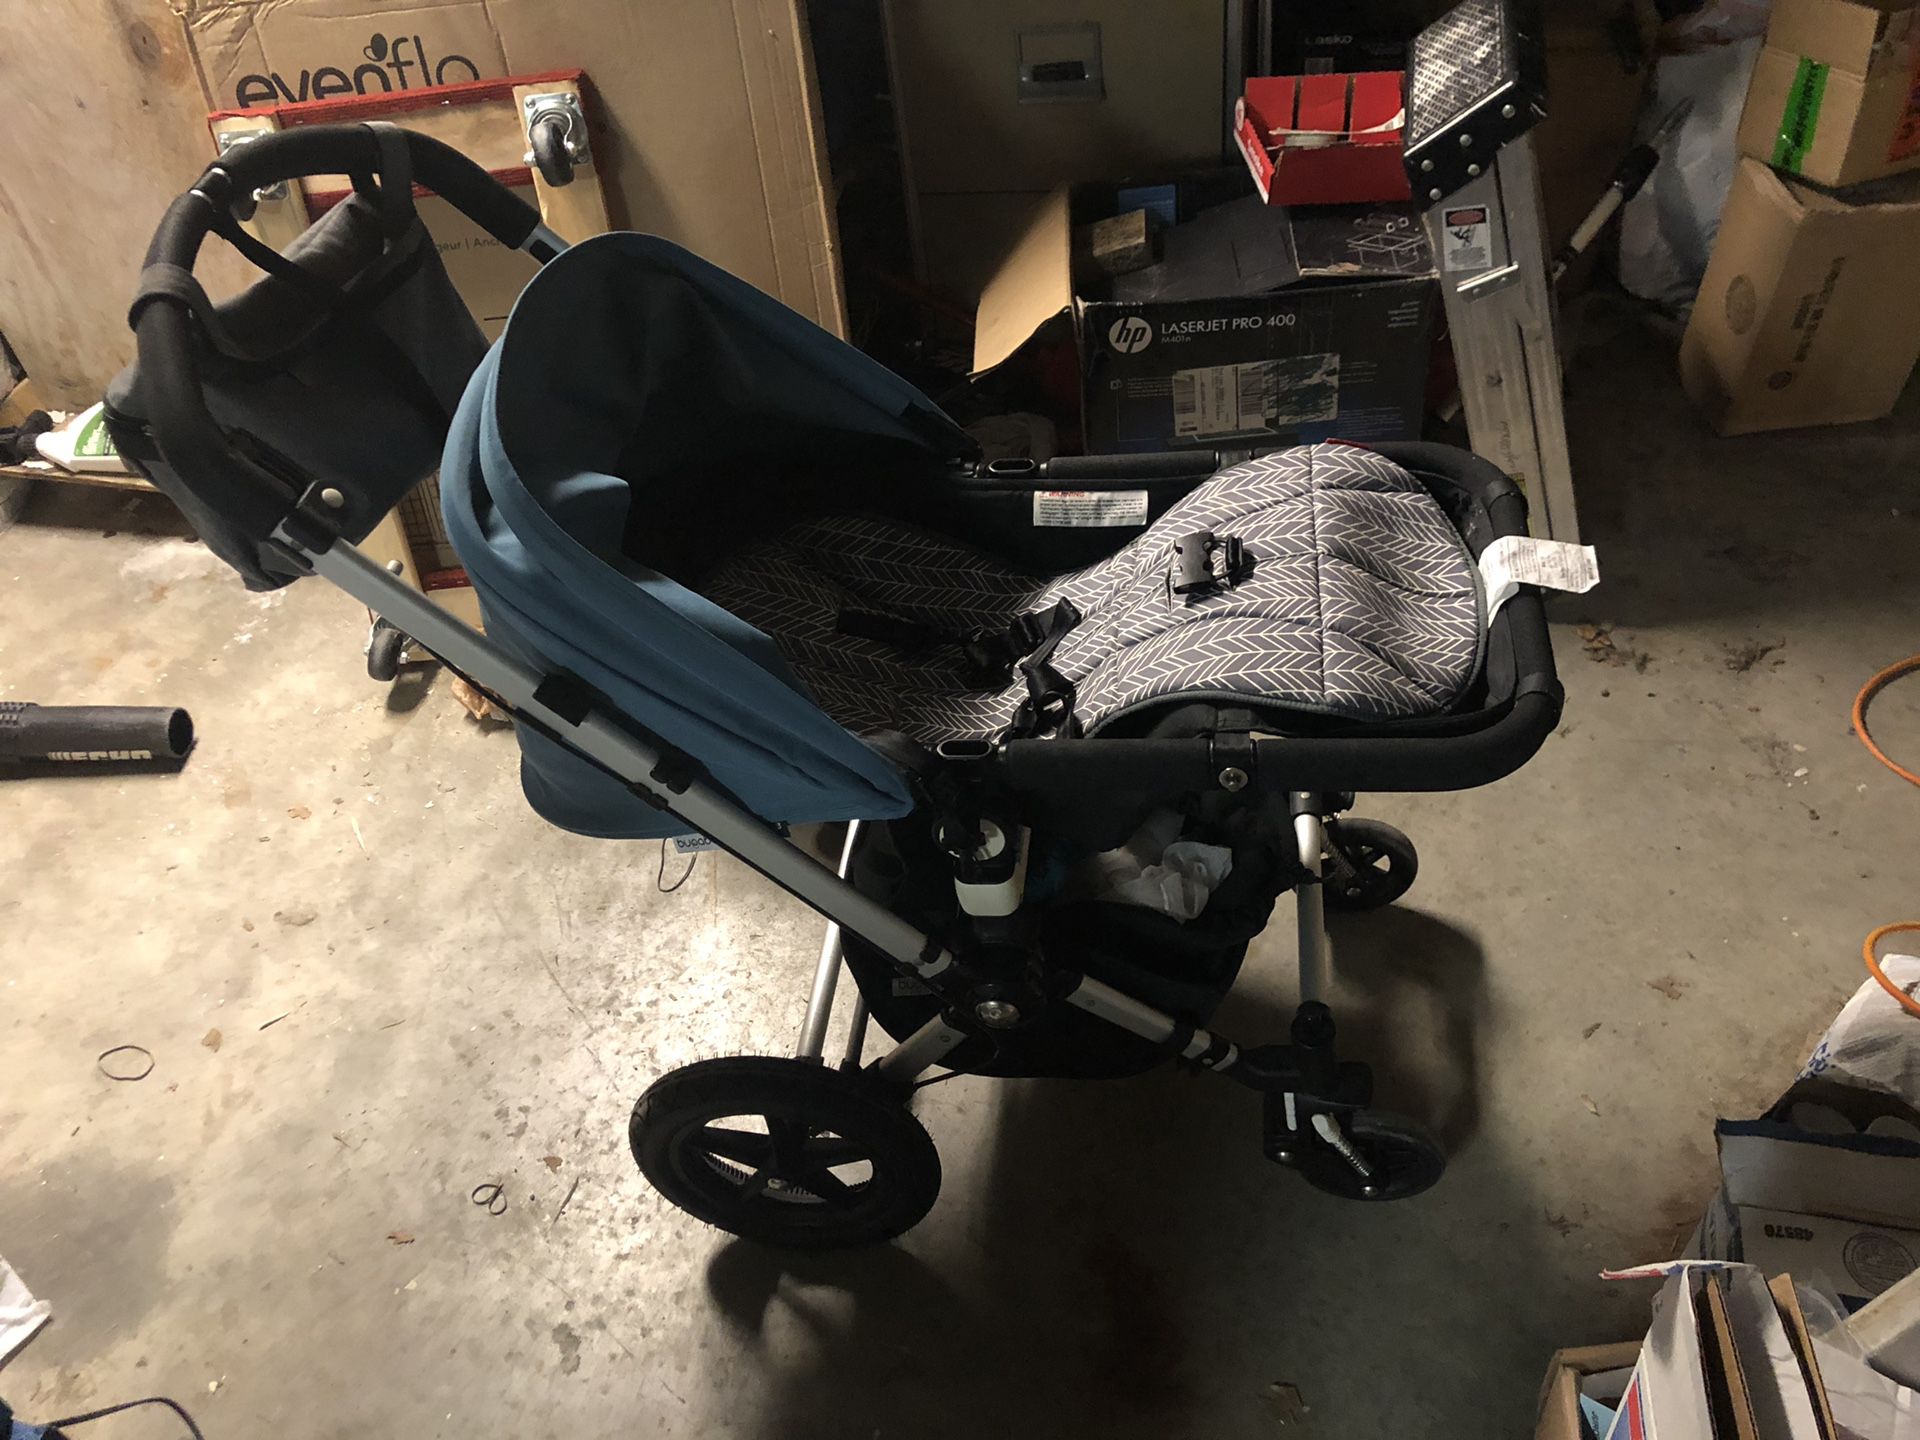 Bugaboo Stroller with accessories